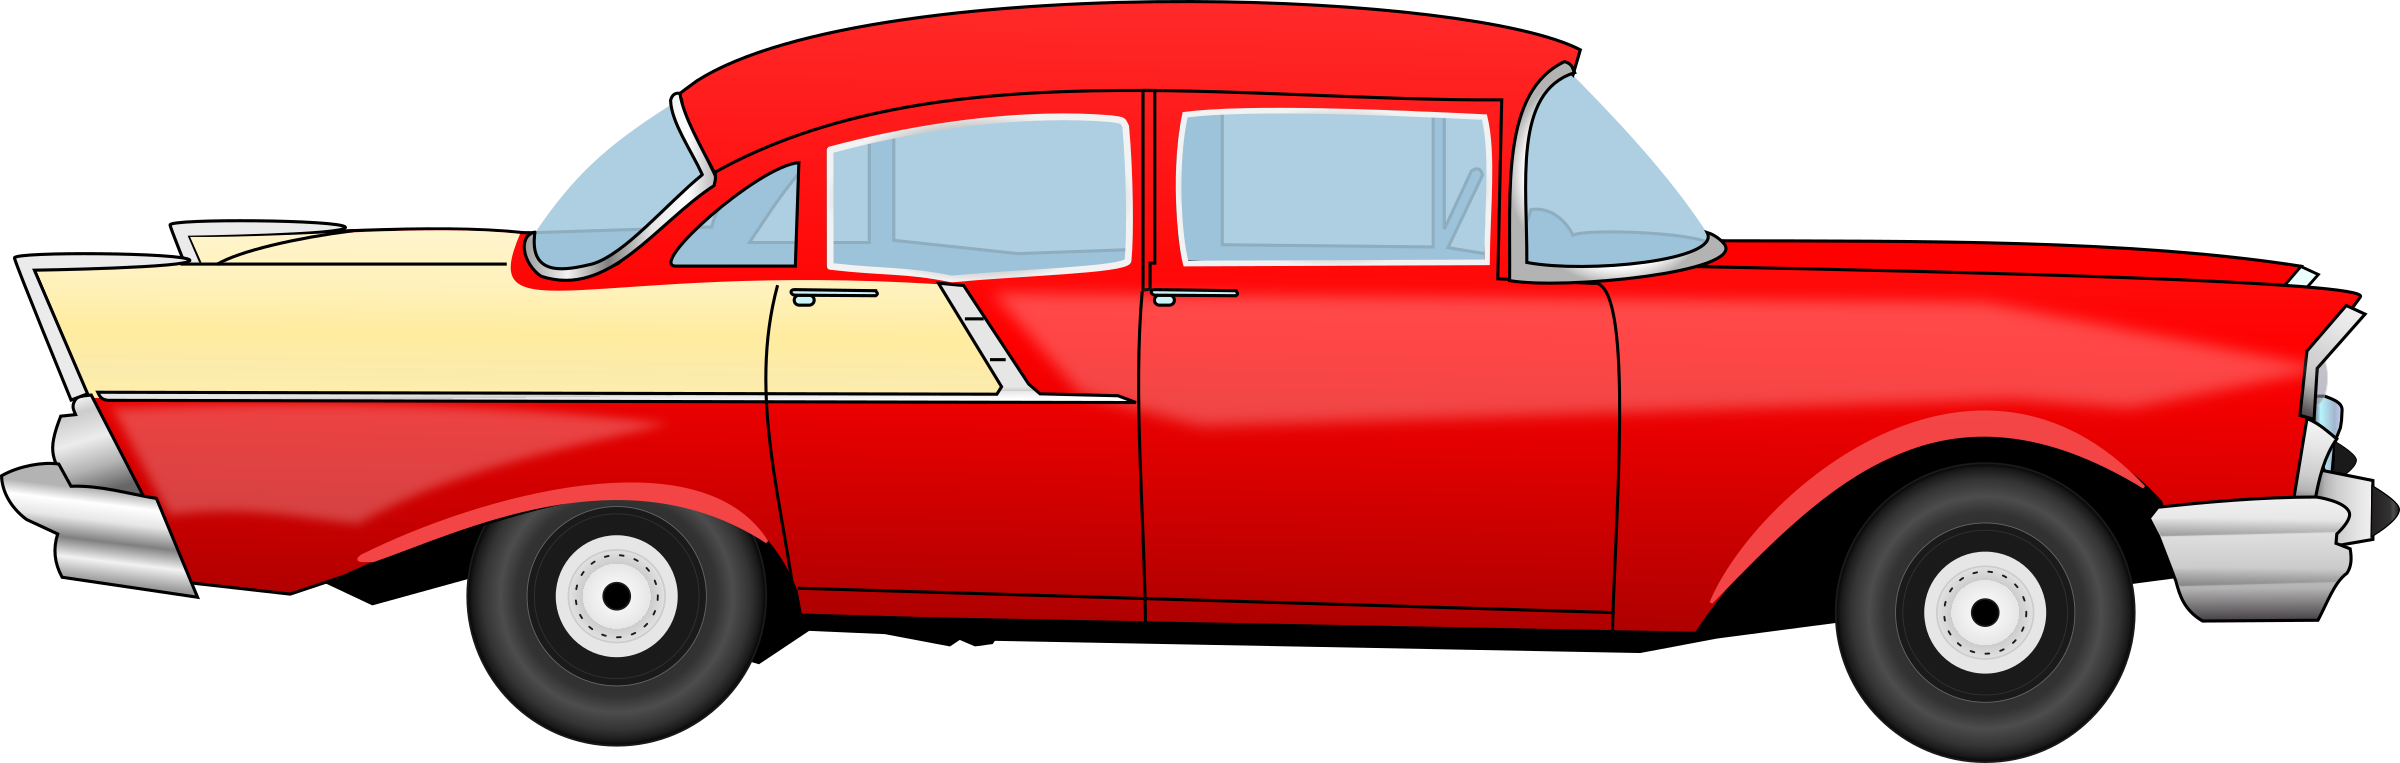 A Red Car With A White Door